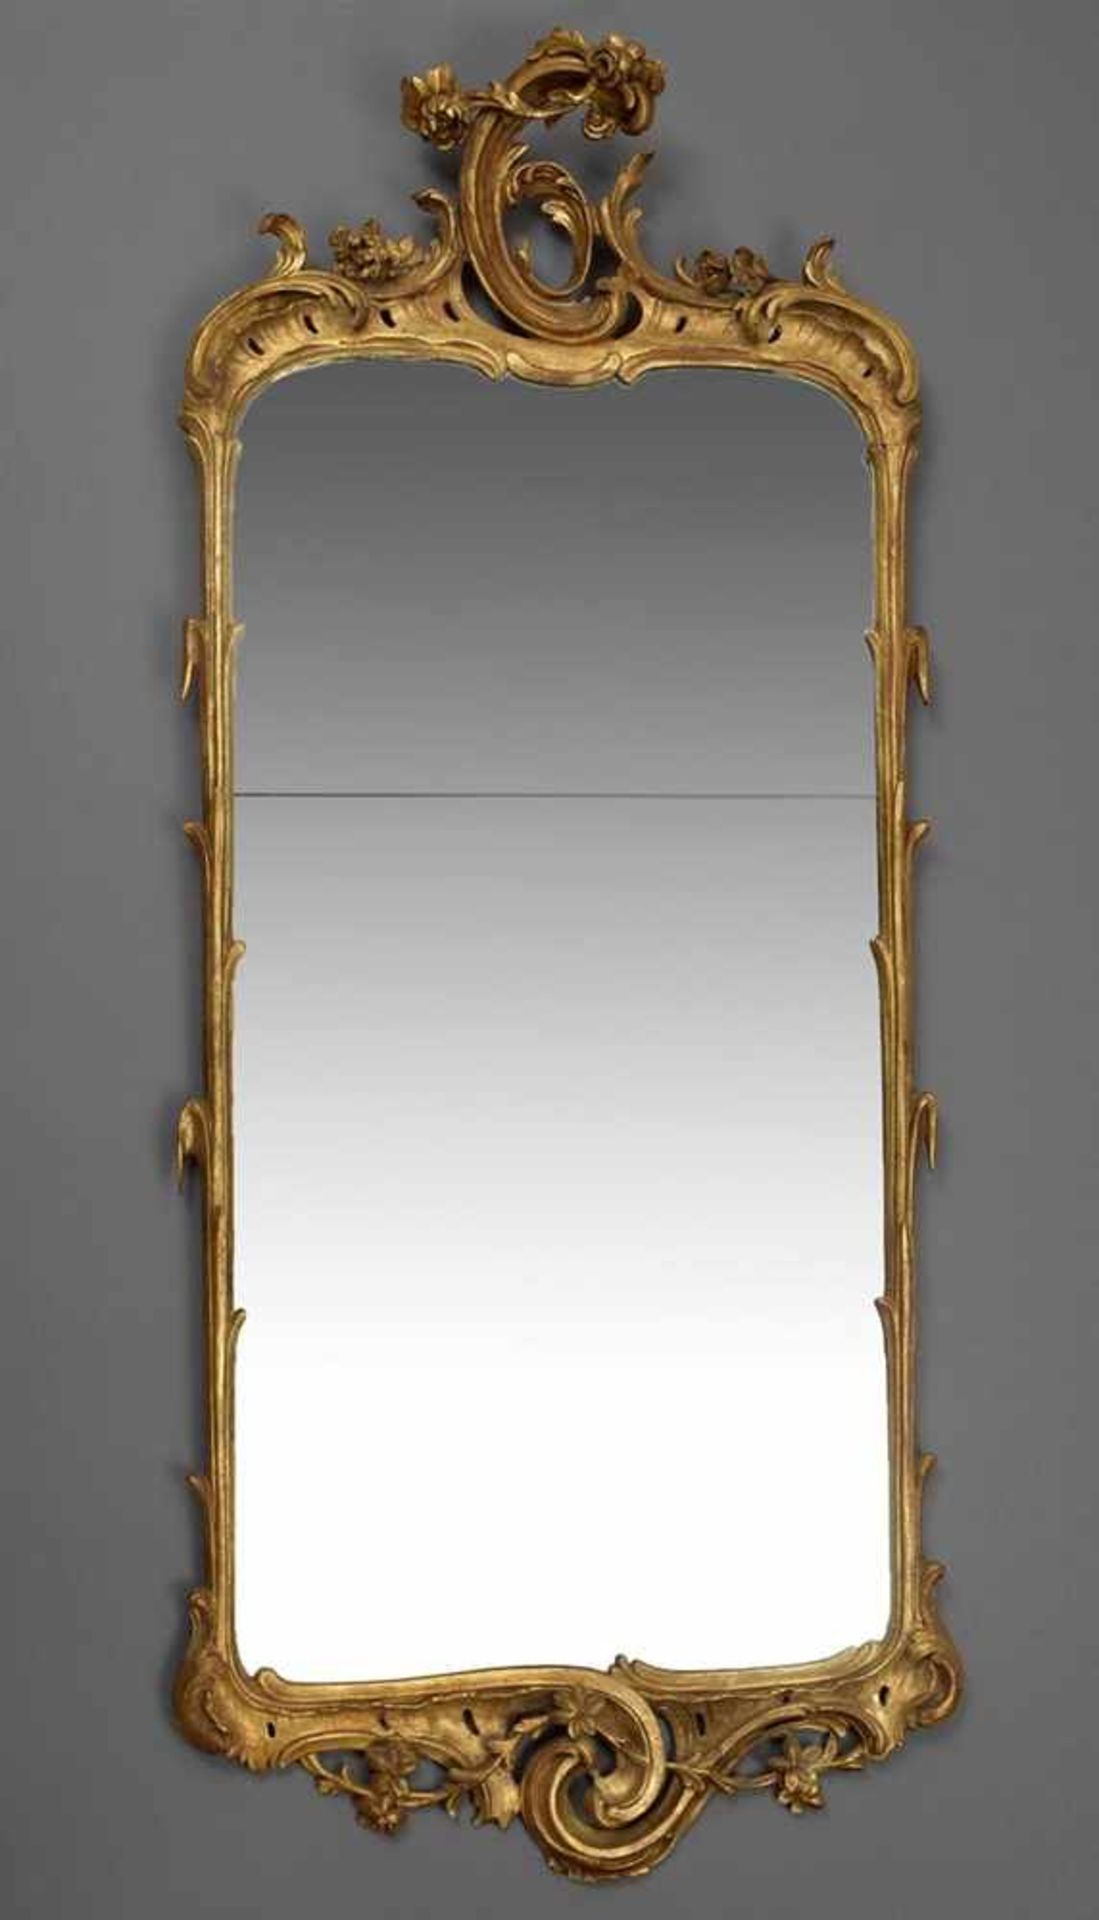 Gilded rococo mirror with carved wooden leaf frame and plastic flowers, probably Holland 18th